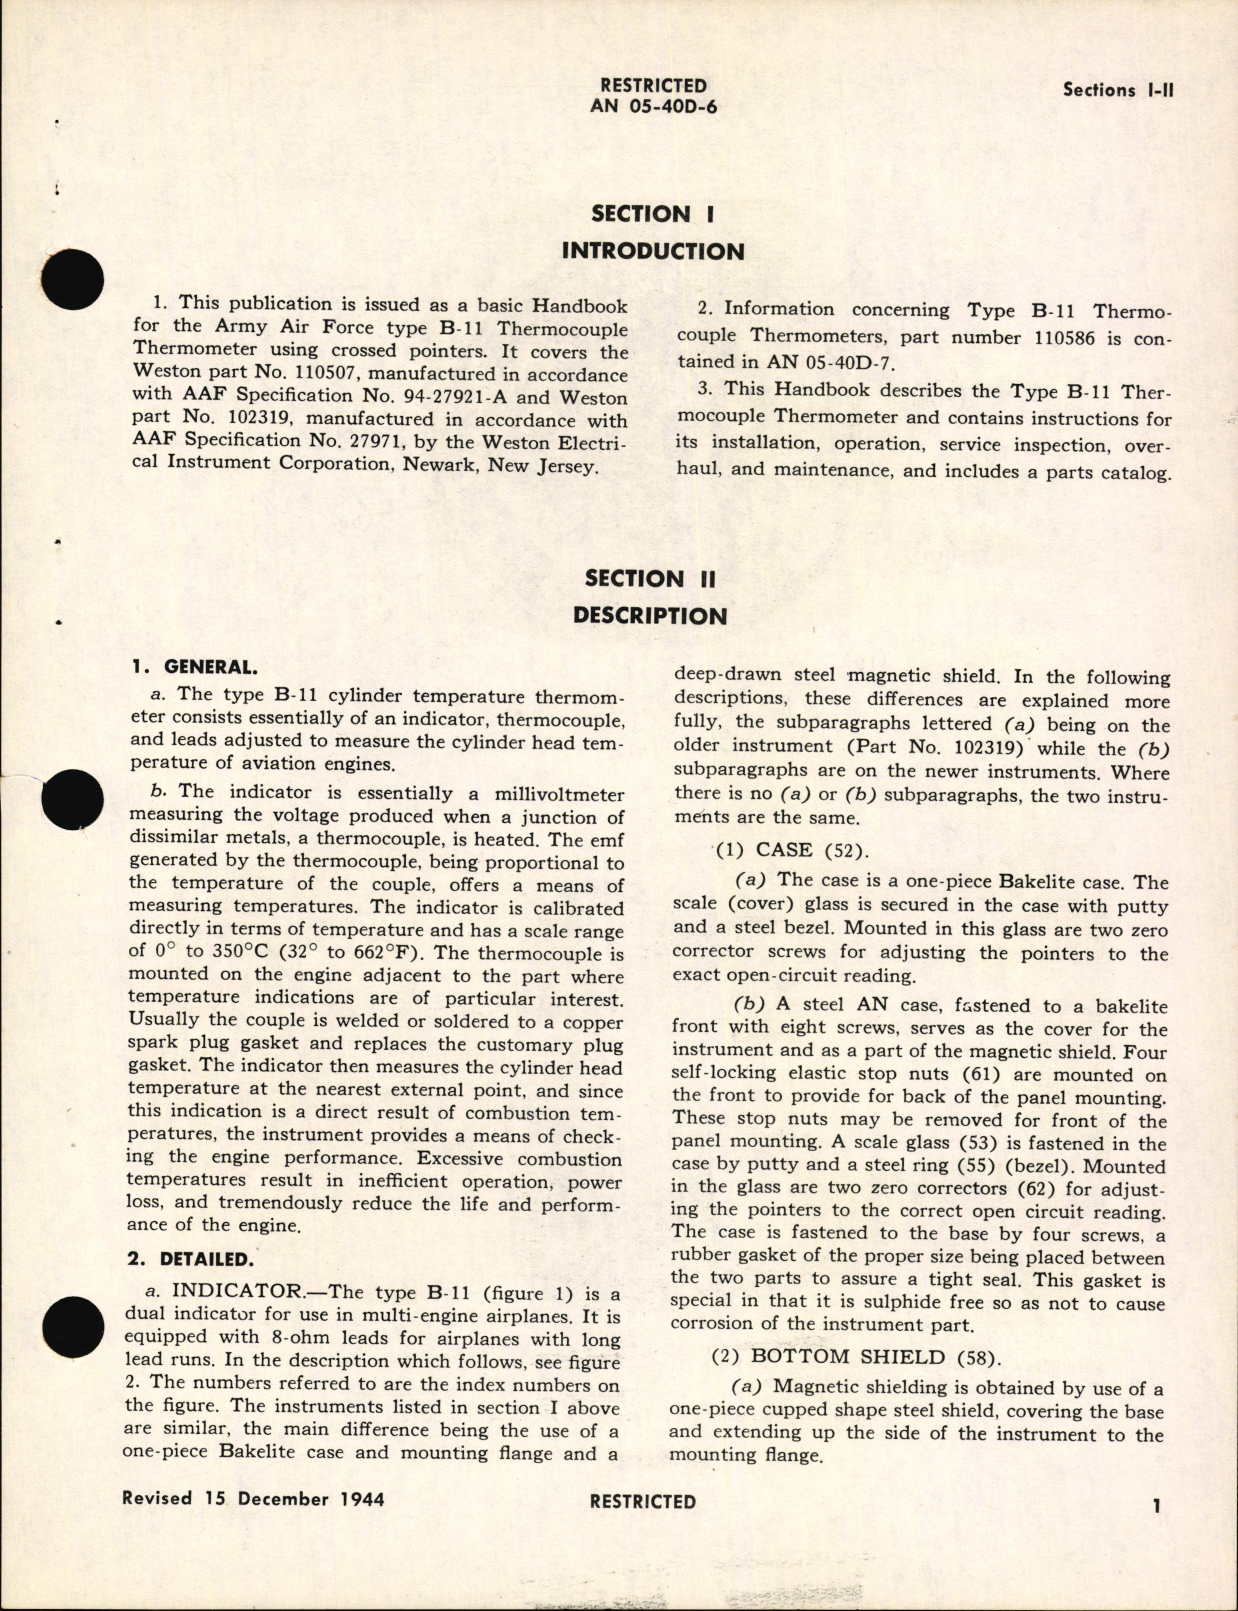 Sample page 7 from AirCorps Library document: Handbook of Instructions with Parts Catalog for Type B-11 and F.S.S.C. 88-I-2660 Thermocouple Thermometers